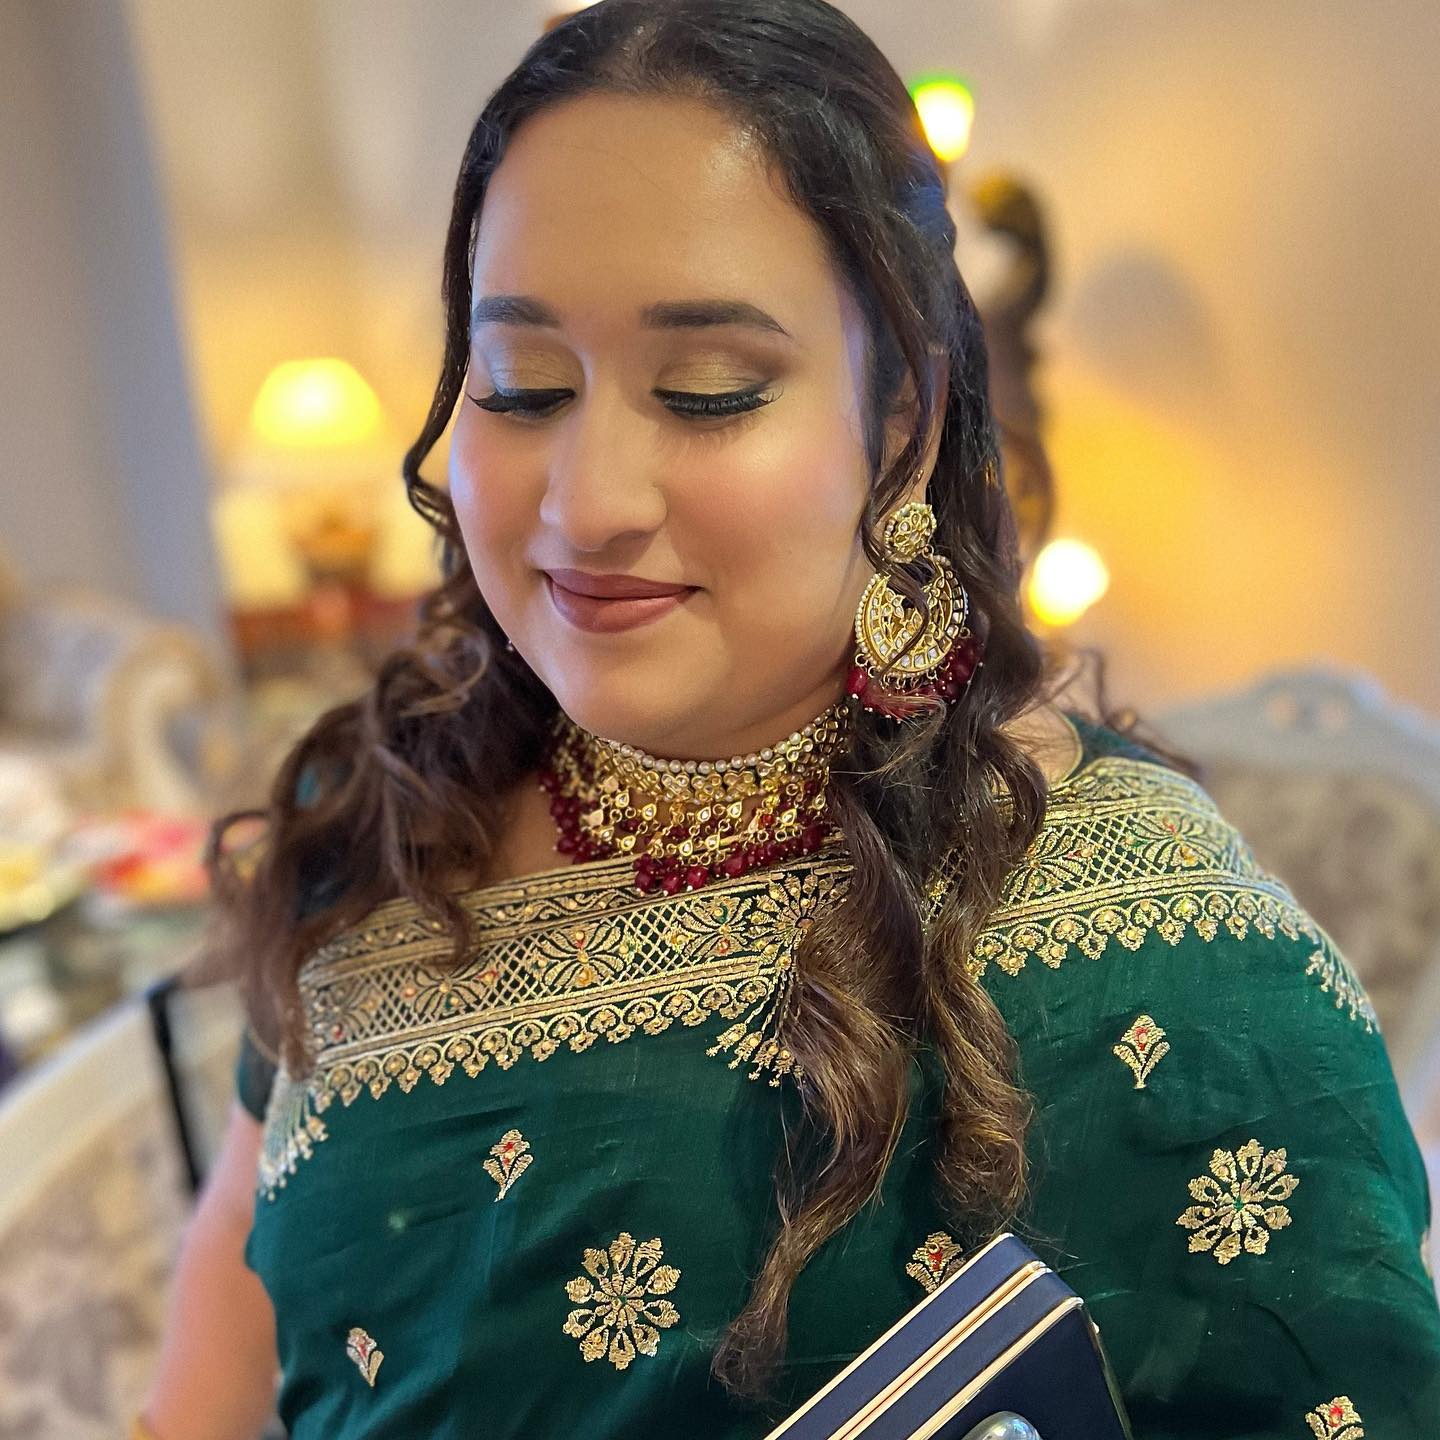 Throw🔙 Tuesday… going through photos of looks I’ve created in recent months/weeks for some gorgeous ladies! 💚

———————————————————————————
❗️Taking all 2022/2023 bridal and 2022 non-bridal bookings! Secure a booking for your next event via the link in my bio.
———————————————————————————
❗️1:1 Personal Makeup Lessons Now Available. Enquire via the website in bio for more information.
———————————————————————————
#makeupartistsydney  #sydneymakeupartist #sydneymakeupartists  #100wattskin #glowyskin #maccosmetics #brideoftheday #glammakeup #indiandesigners  #weddingmakeup #fullglam 
 #wedding #maccosmetics #glowingbride #dewyskin #indianwedding #toptags #motd #glameyes #ootd #photoshoot #instafashion #naturalglam #makeup  #indianbride #partymakeup #specialoccasionmakeup